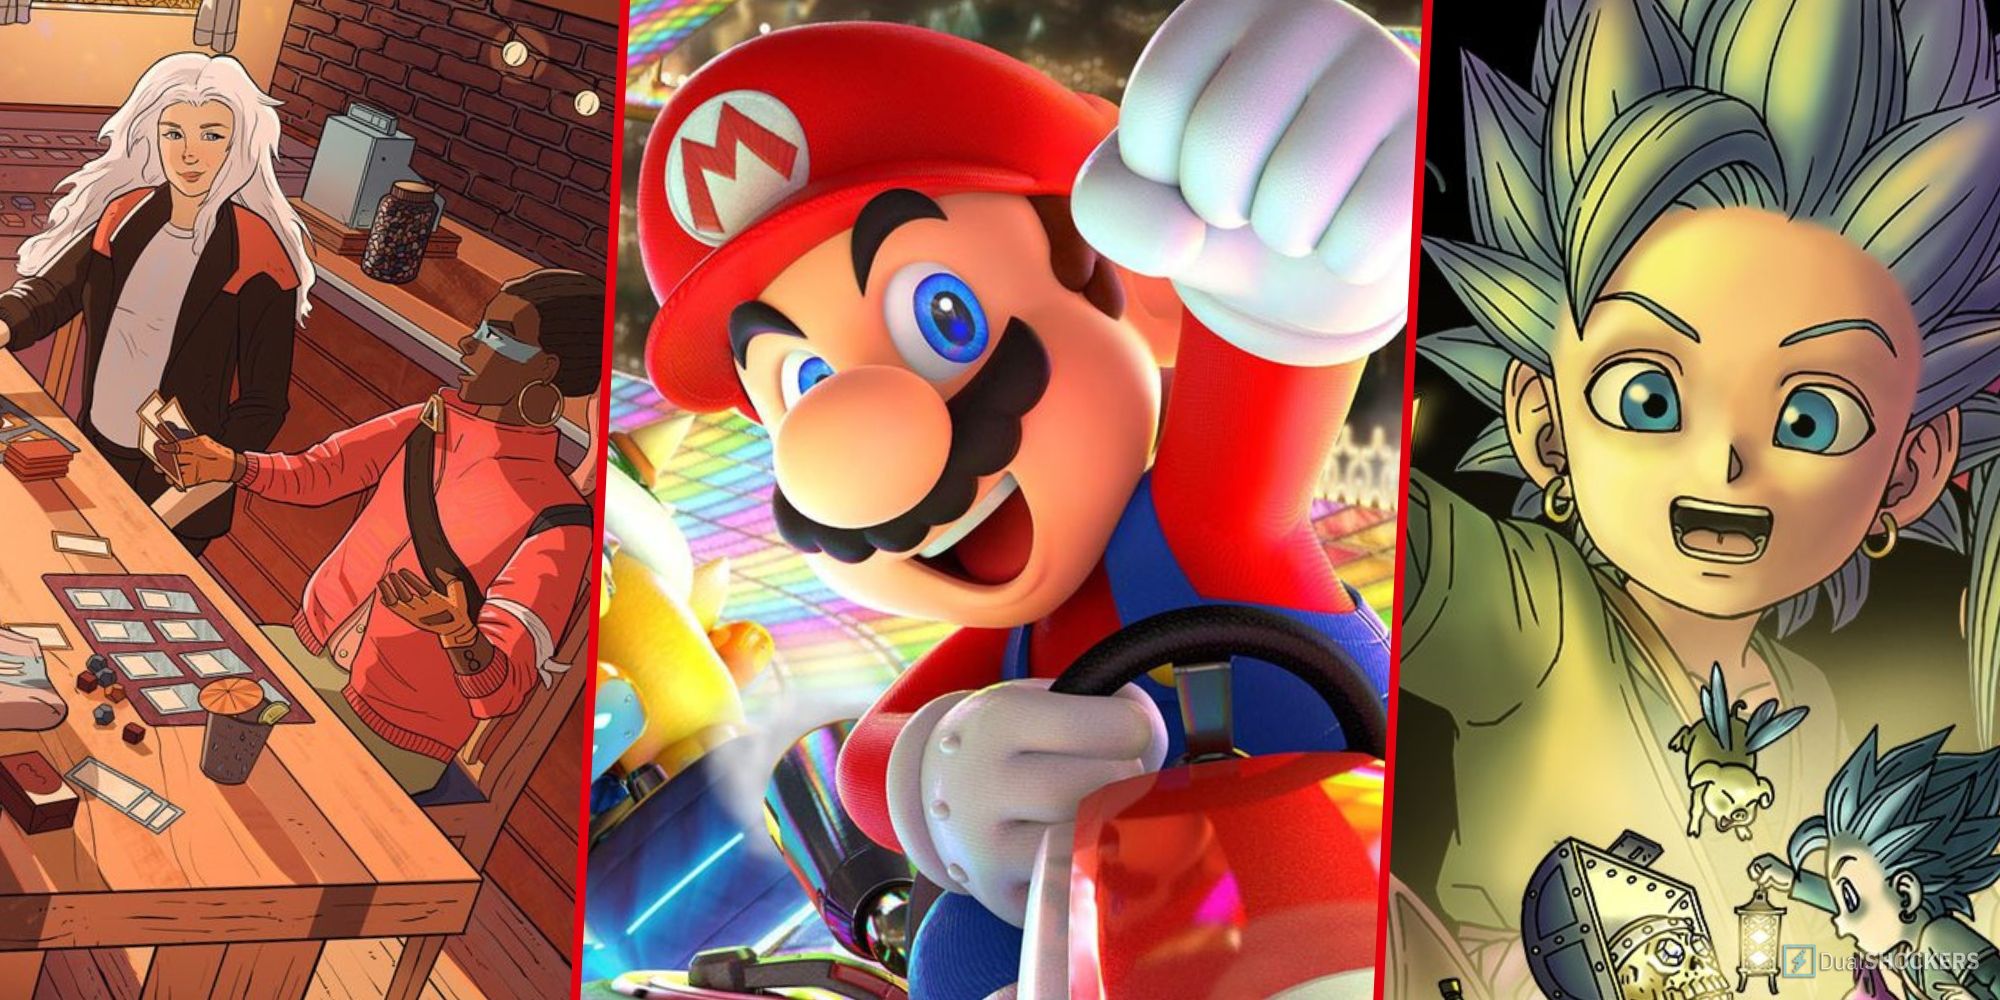 mario kart booster course wave 3 and a new dragon quest hit the switch this week